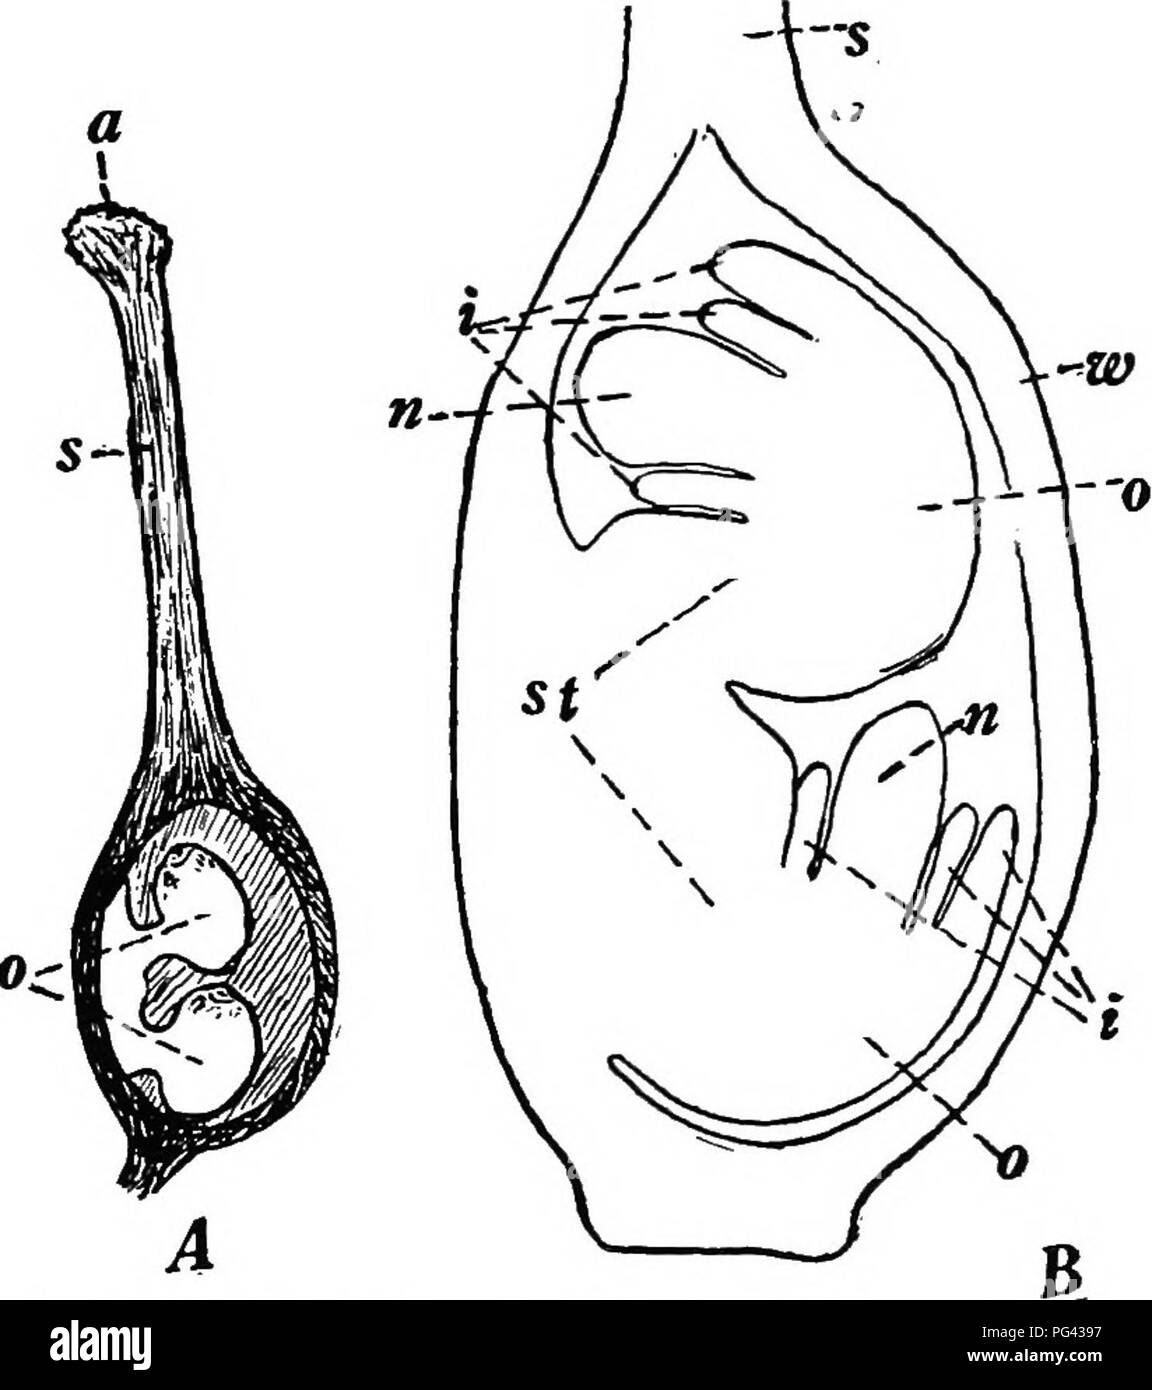 . Botany for agricultural students . Botany. Fig. 39. — Flower and pod of the Garden Pea. A, section through the flower to show ovules, a, ovary; o, ovules; 6, stamens; t, stigma; s, style. B, the matured ovary, called pod, opened to show the matured ovules or seeds (e). Flower enlarged but pod less than natural size.. Fig. 40. — A, pistil of Red Clover with one side of ovary cut away so that the ovules (o) may be seen, o, stigma; s, style. B, lengthwise section through the ovary and ovules of Red Clover and very much enlarged to show the parts of the young ovules, w, ovary wall; o, ovules; s, Stock Photo